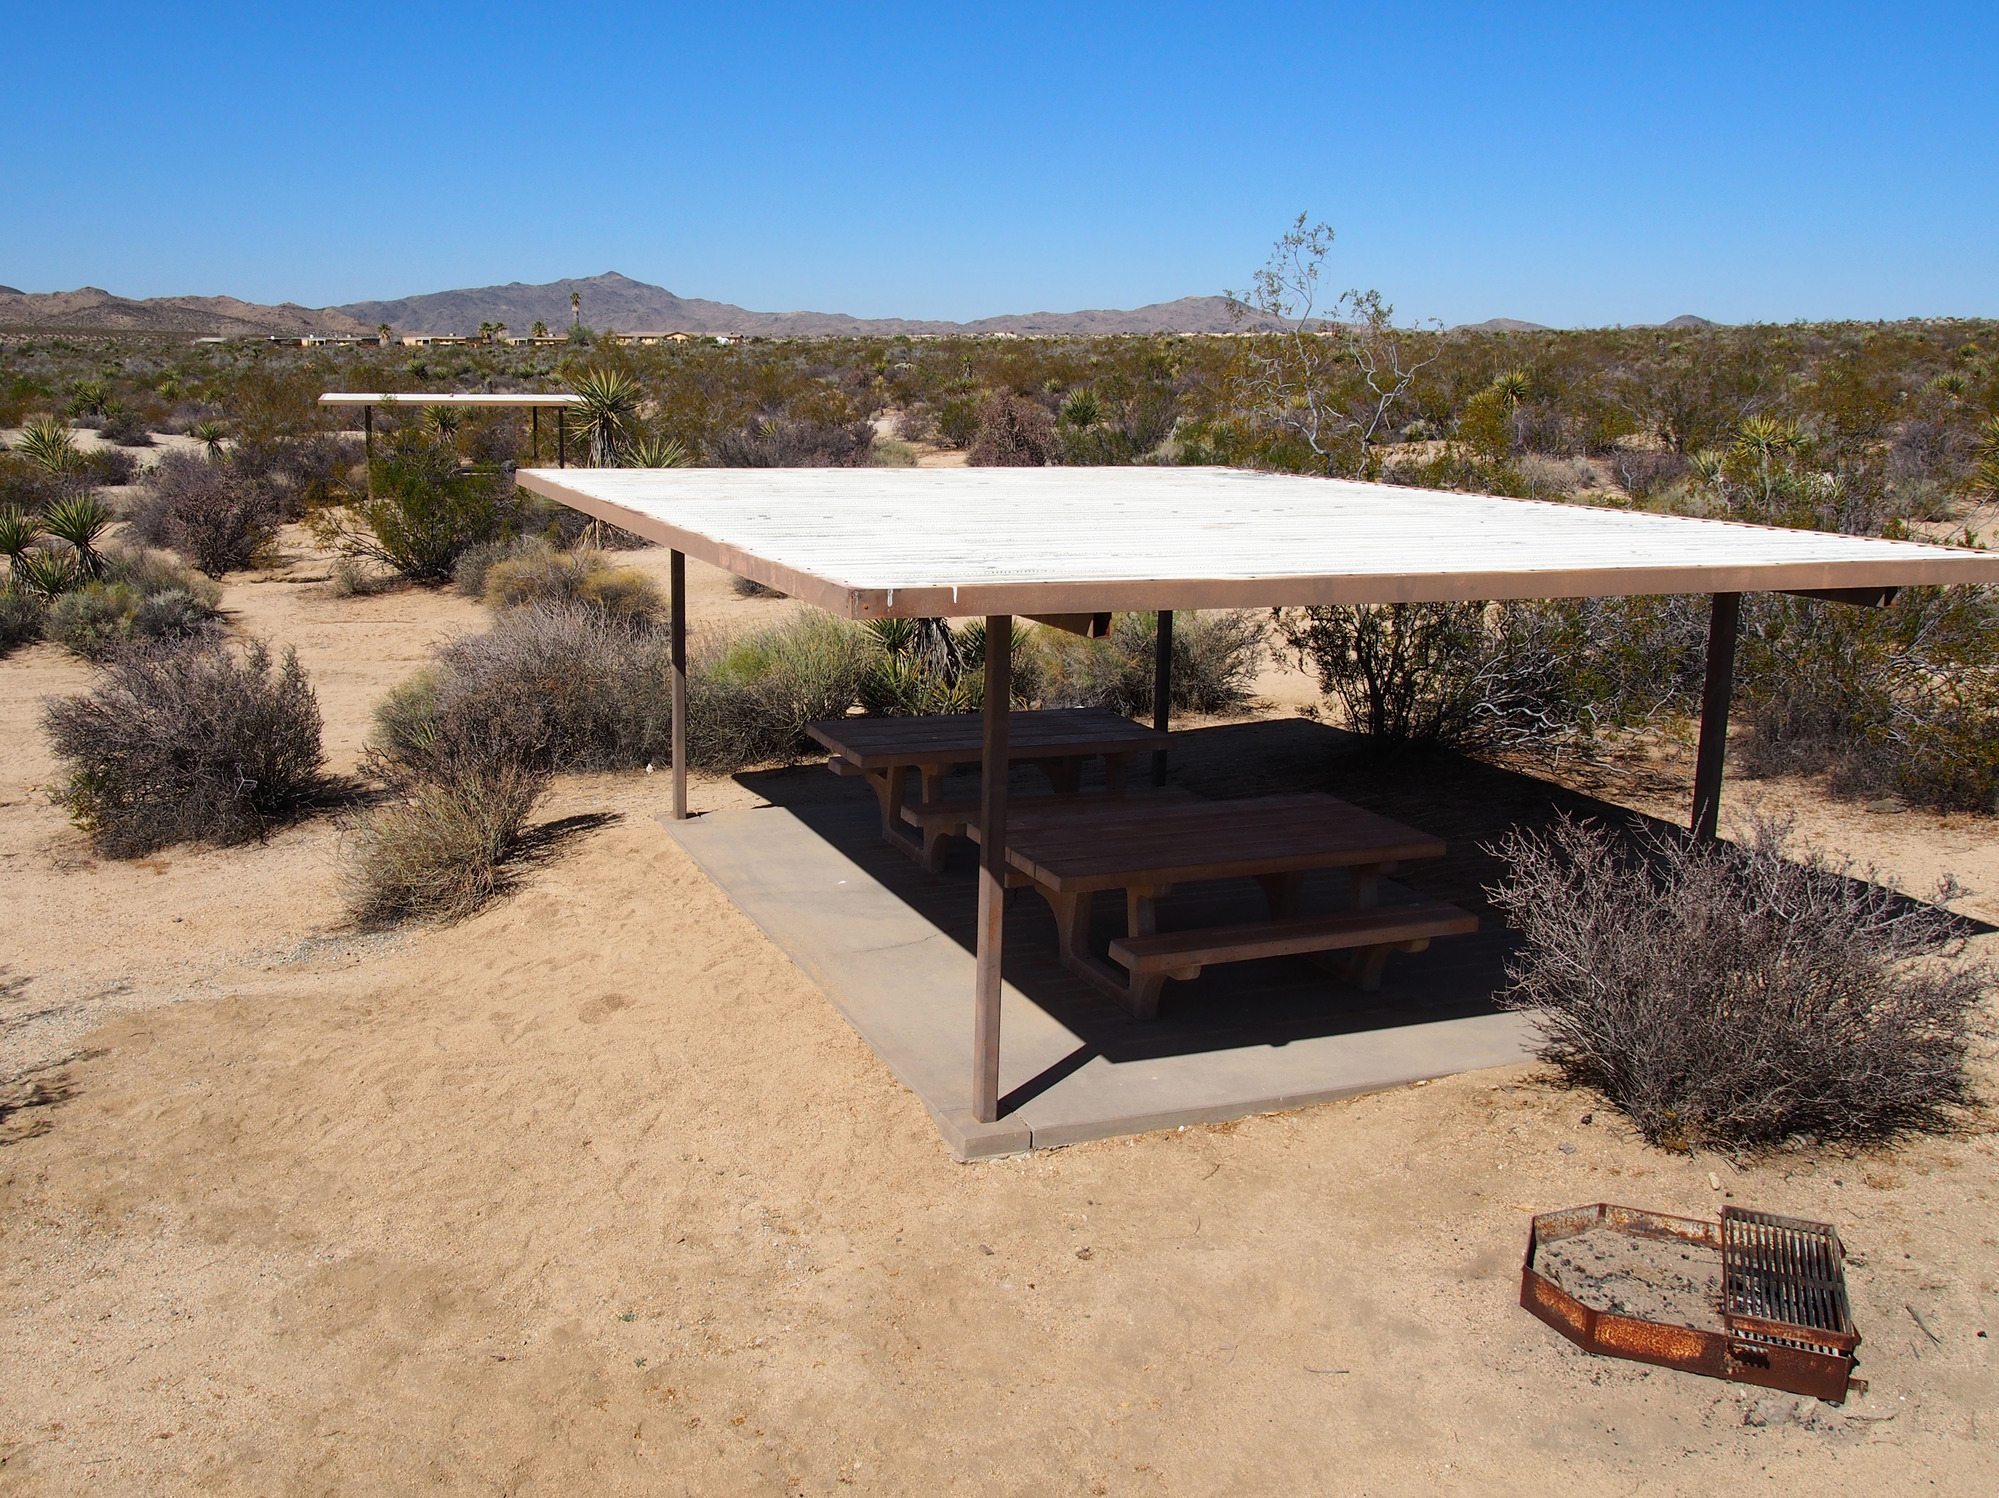 The Park – Shade Structures and Desert Landscaping